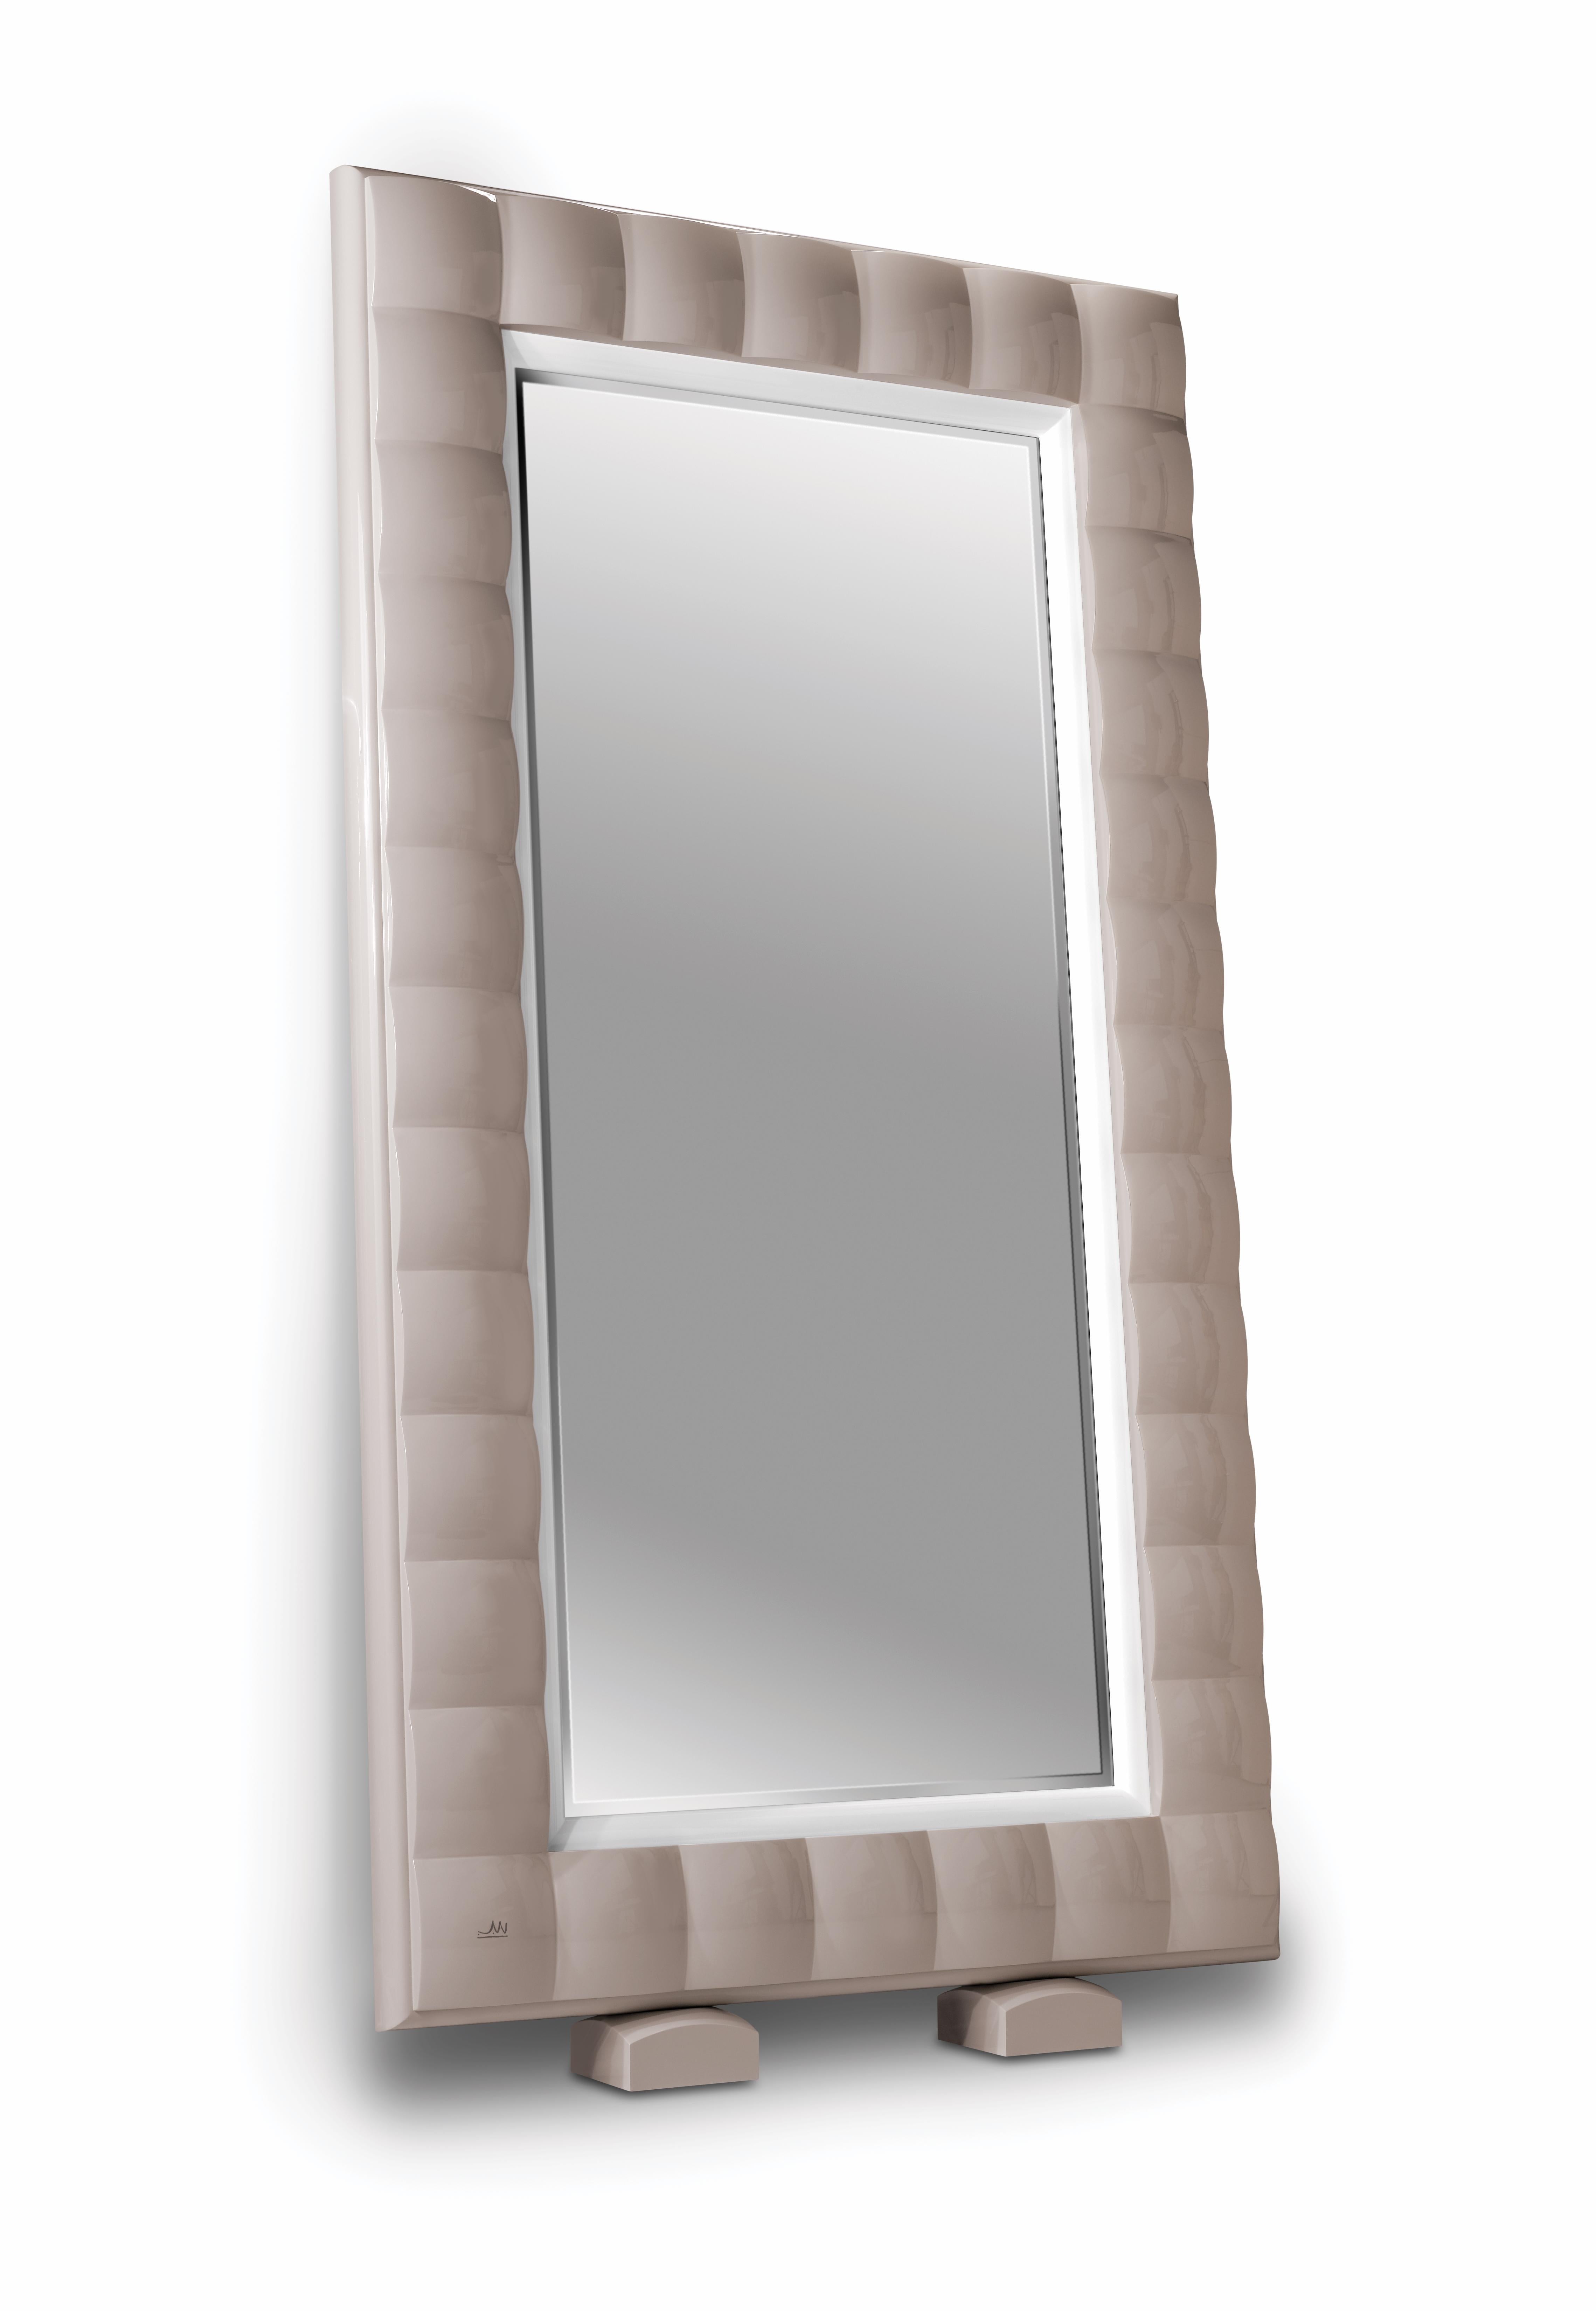 The cleverly named Narcissa mirror is as beautiful as what it reflects. Each “pillow block” in the mirror’s frame is shaped and sanded by hand to create an enticingly textured surface. The Narcissa is available in three sizes to accommodate any